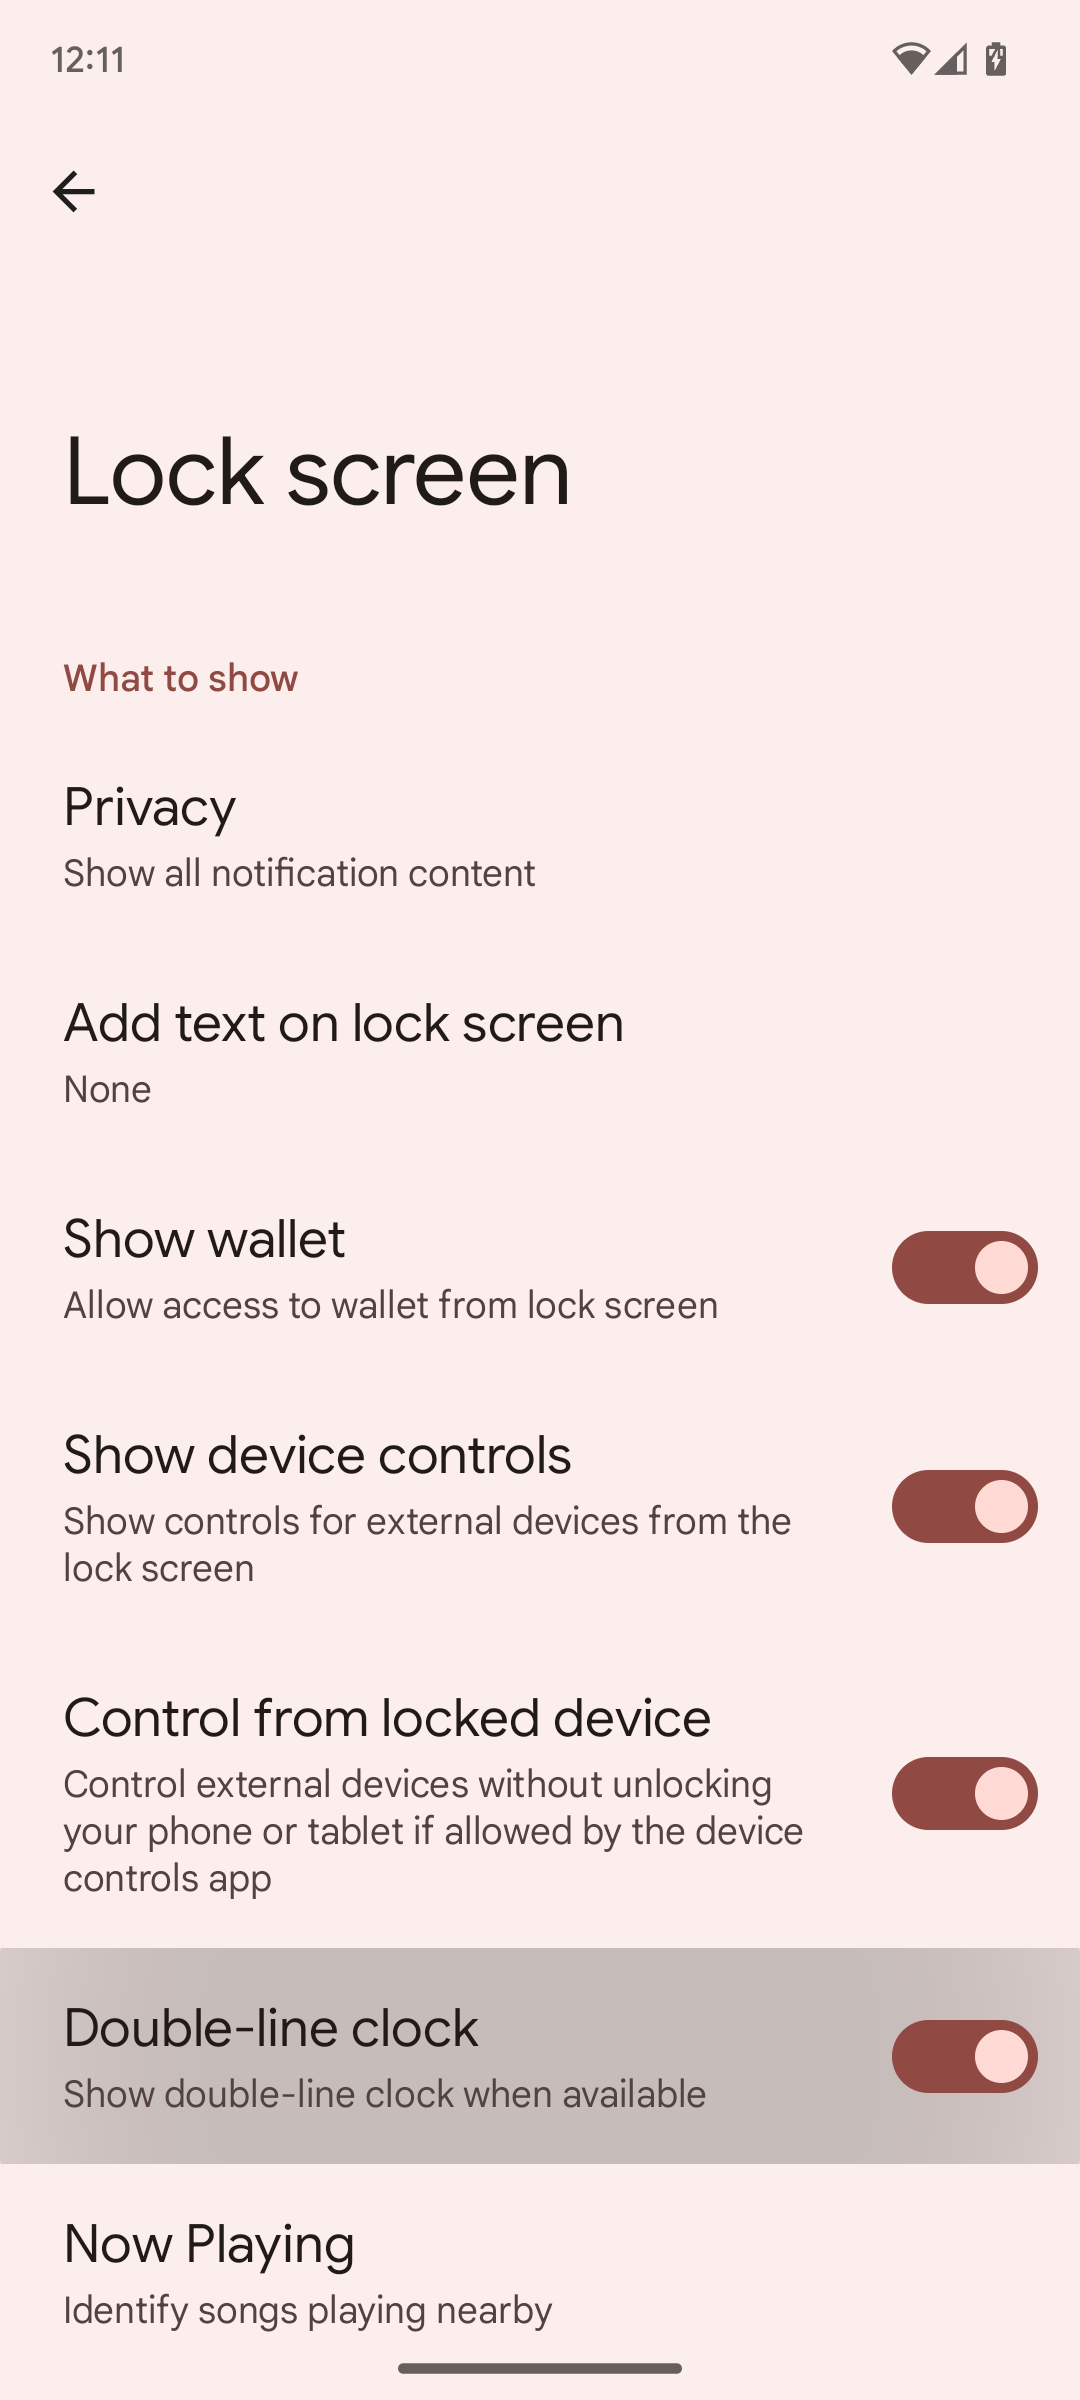 Android 13's lock screen options with double-line clock toggle highlighted